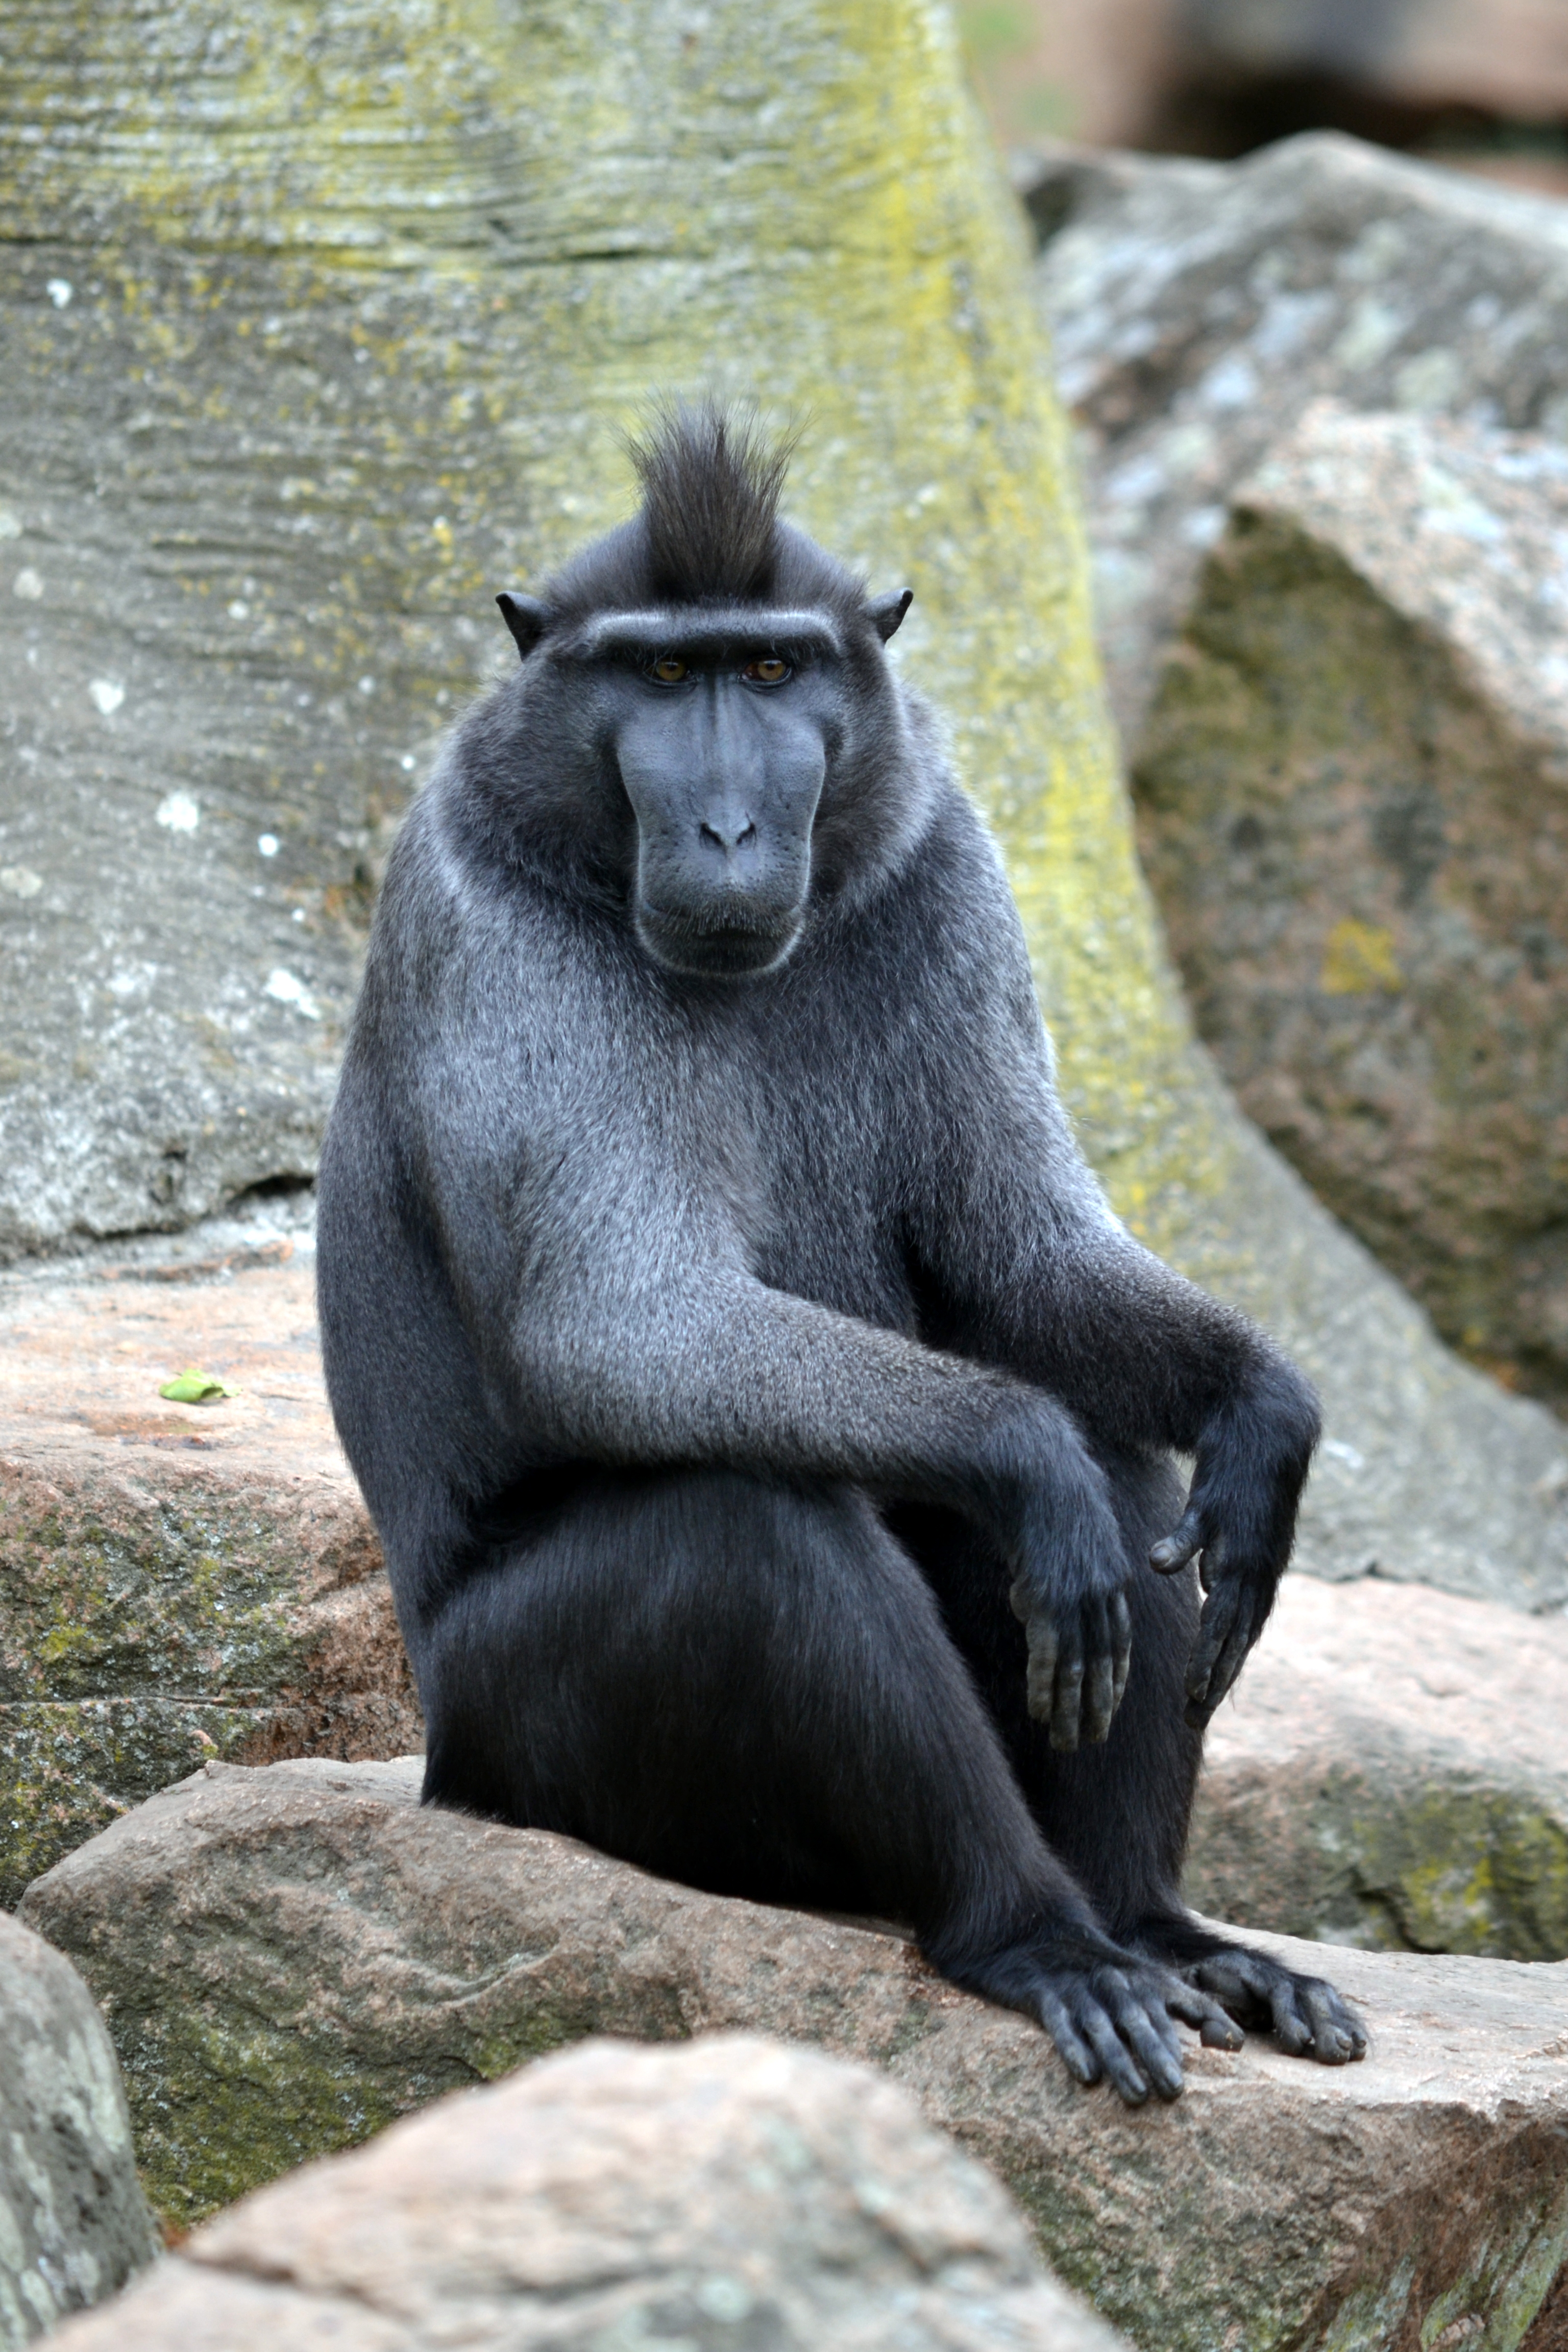 Celebes crested macaque - Wikipedia